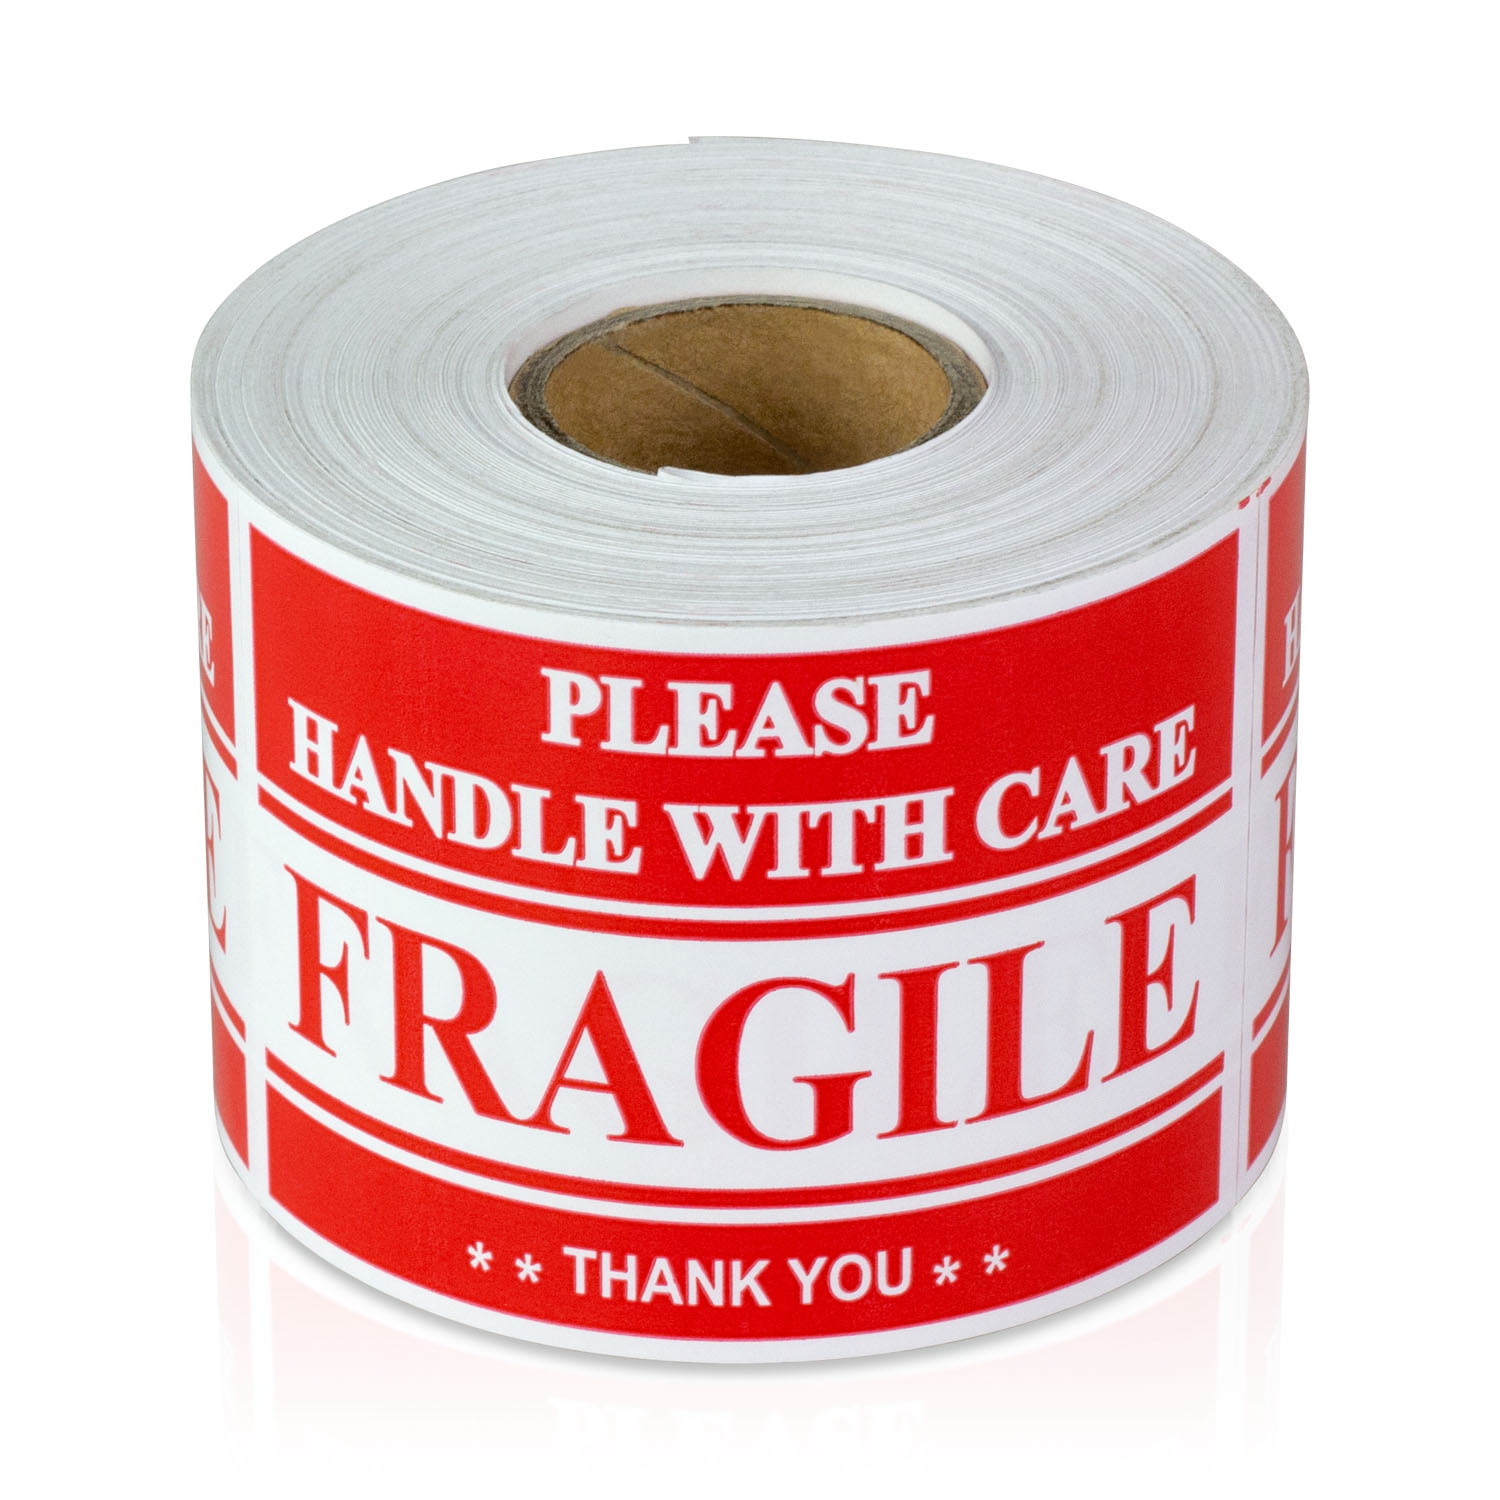 FRAGILE Please Do Not Bend Labels Self Adhesive Small Medium Large Stickers R030 